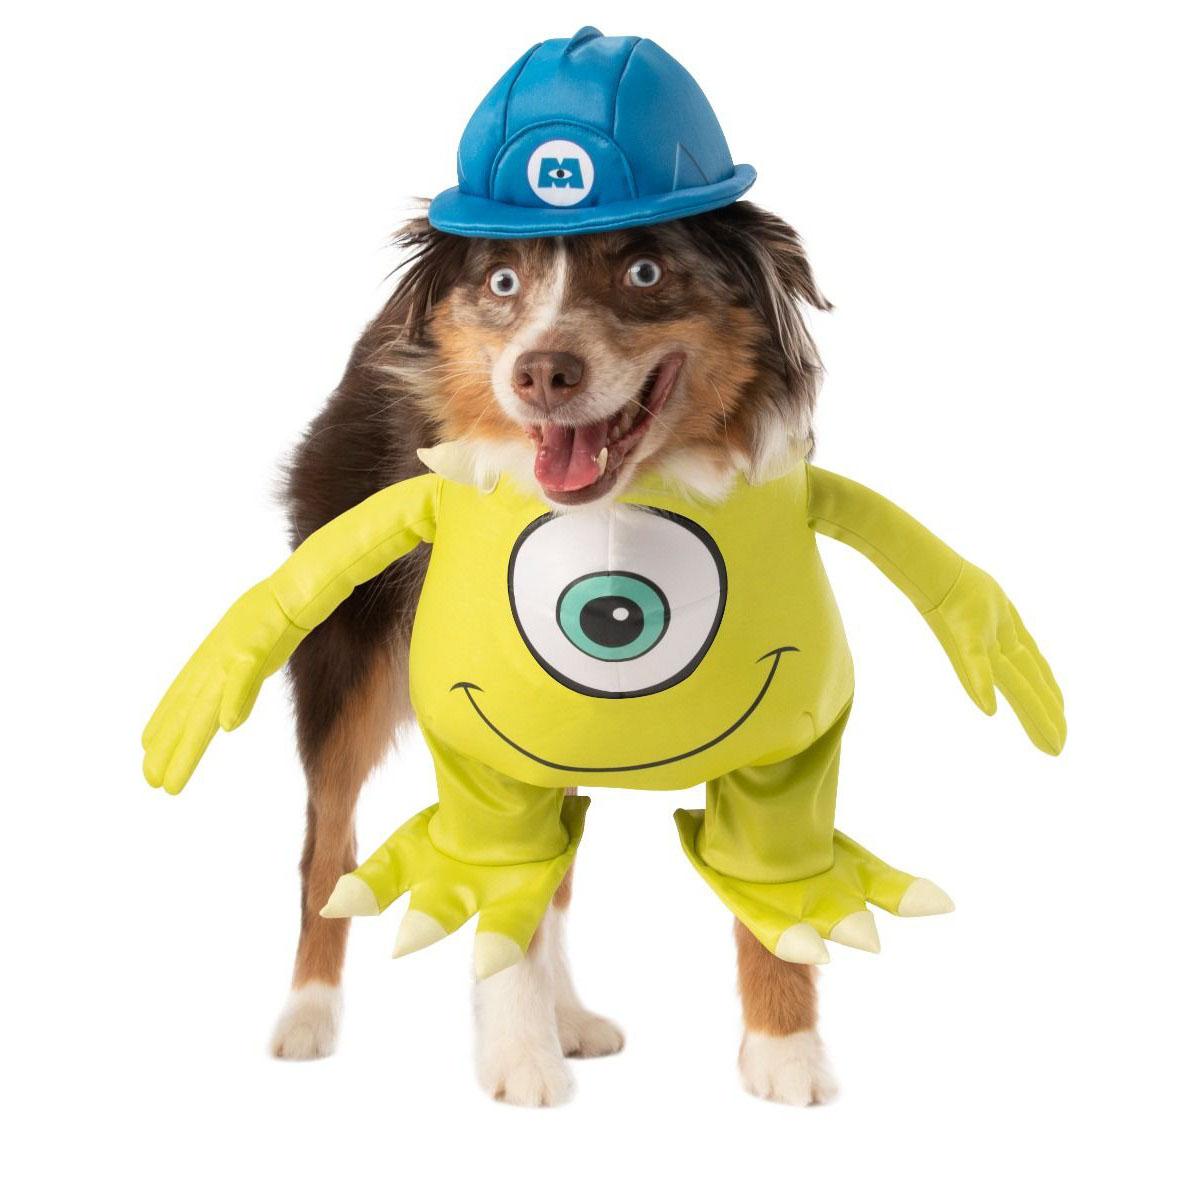 Monsters Inc. Walking Mike Dog Costume by Rubie's